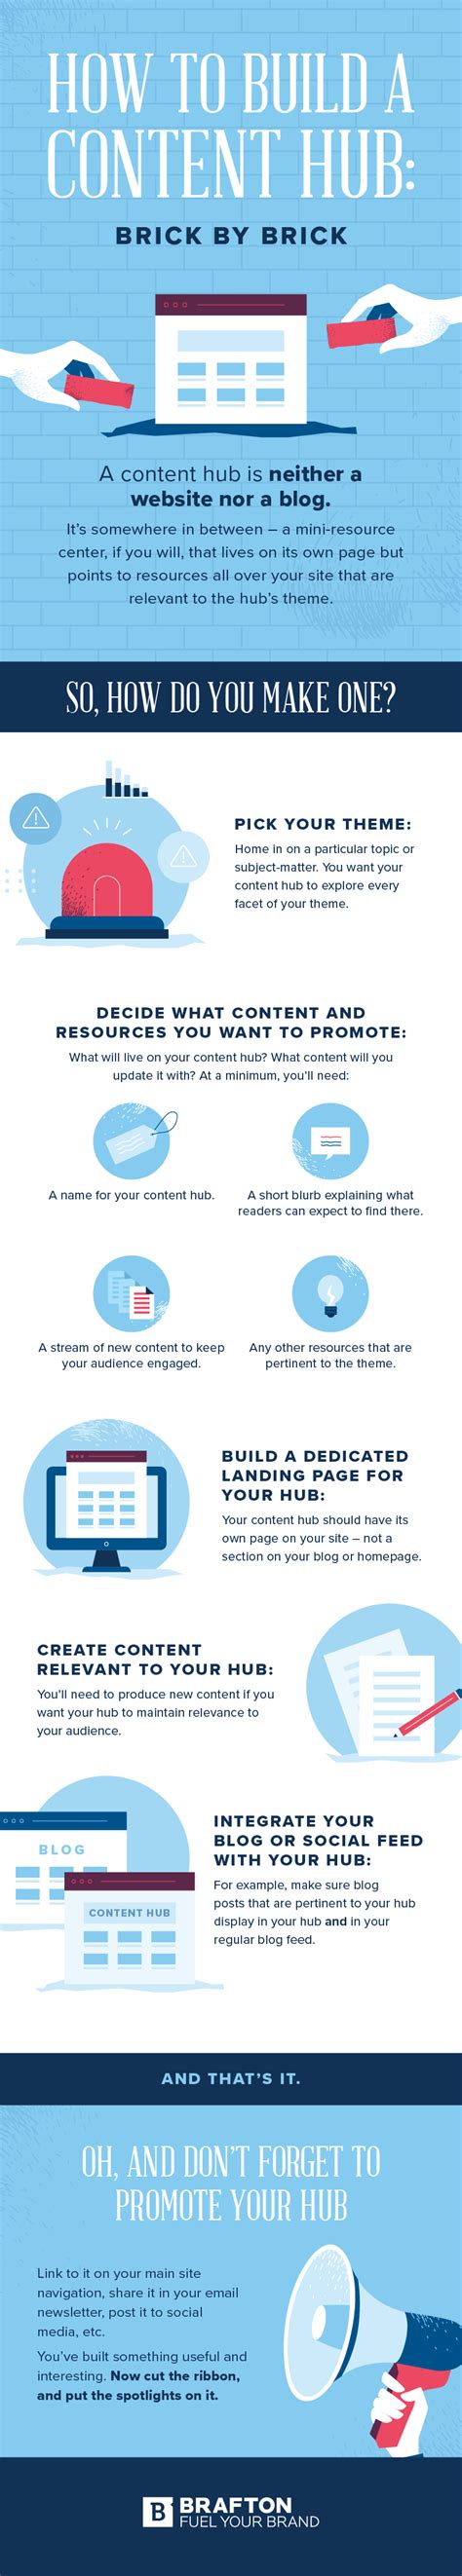 content hub examples infographic brafton